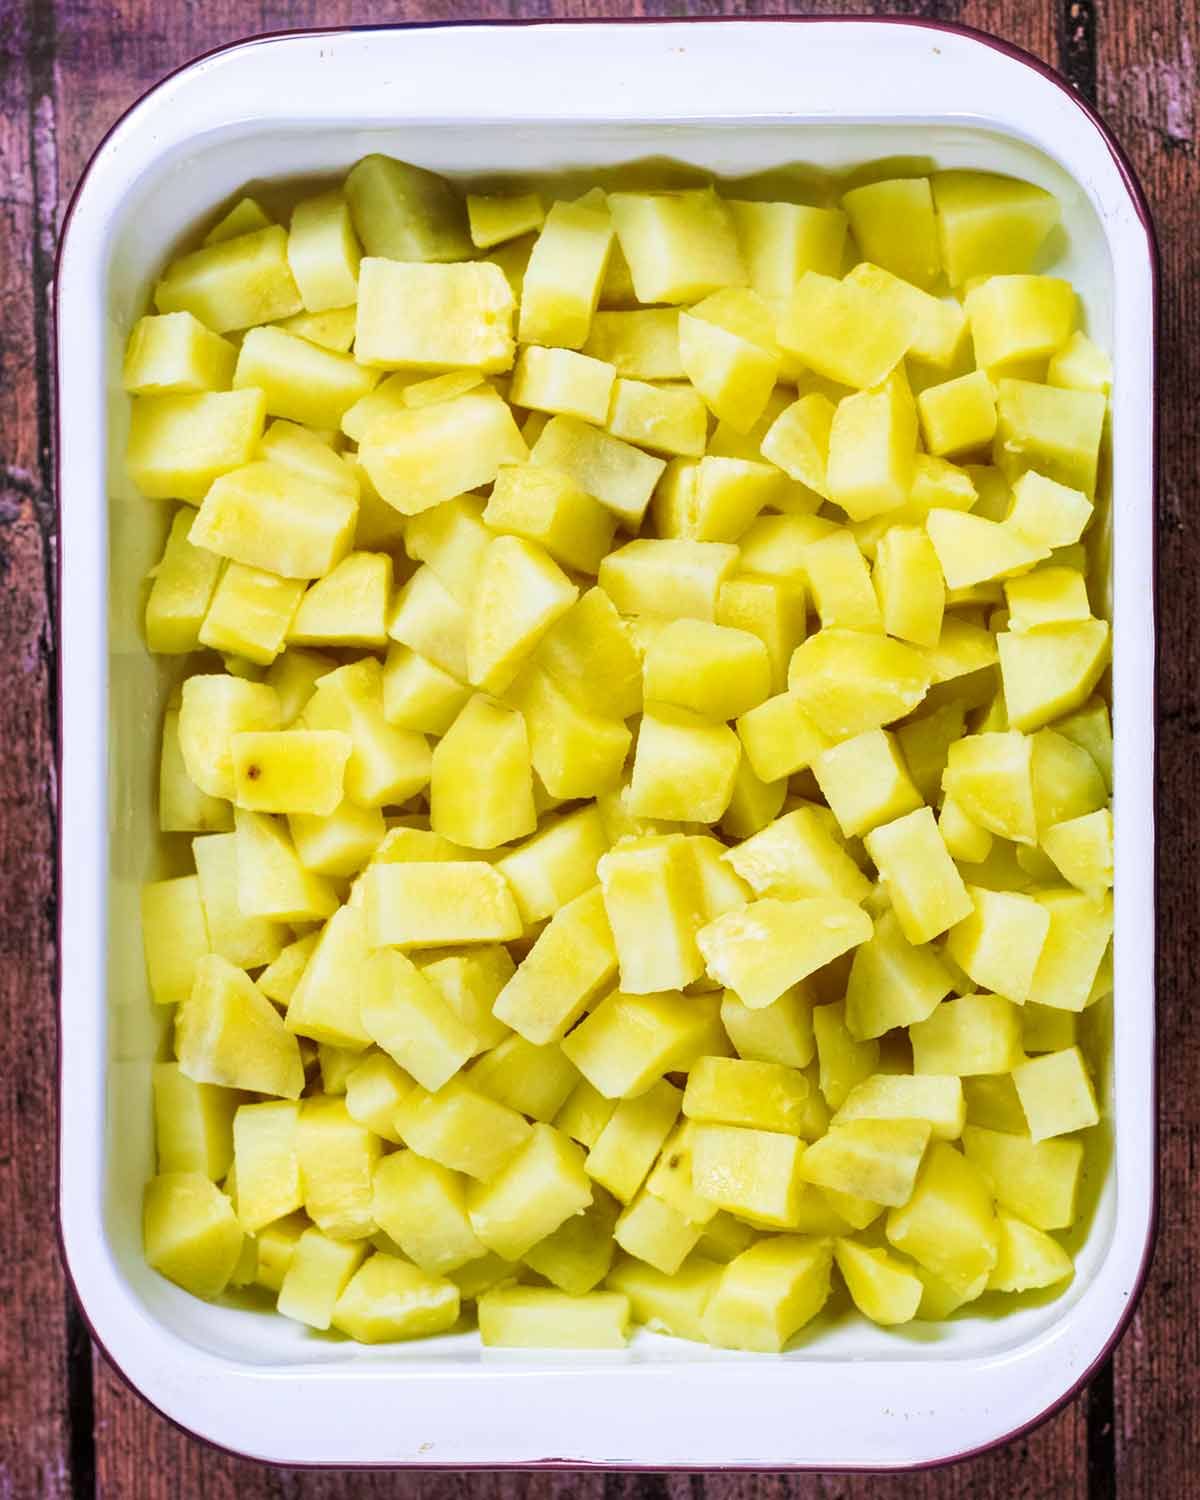 Cooked chopped potatoes in a rectangular baking dish.